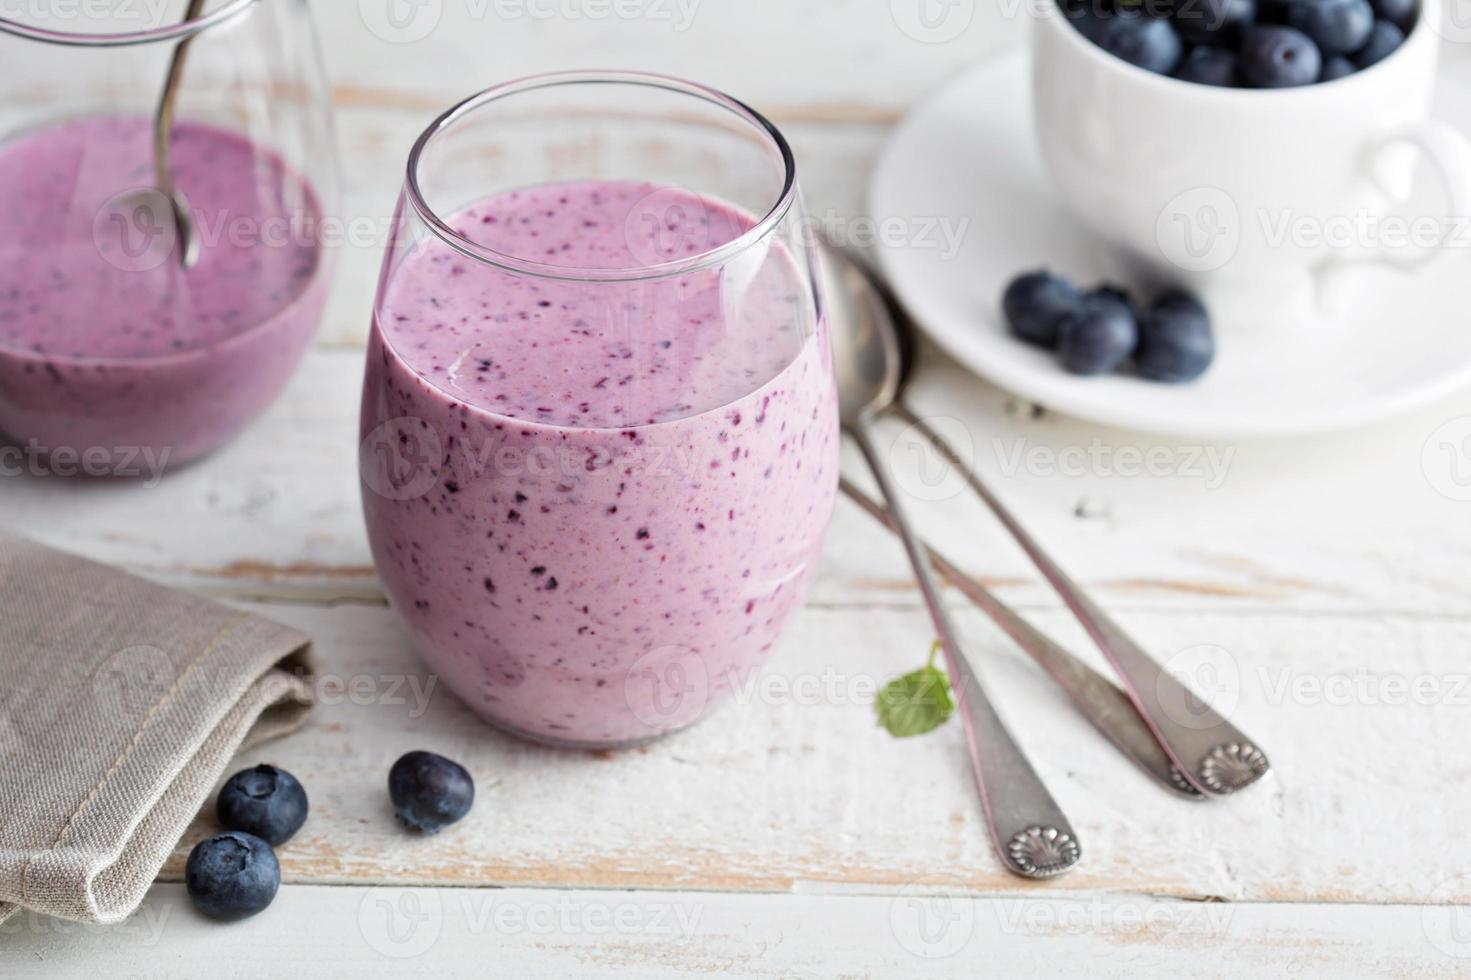 Blueberry banana smoothie in a glass photo